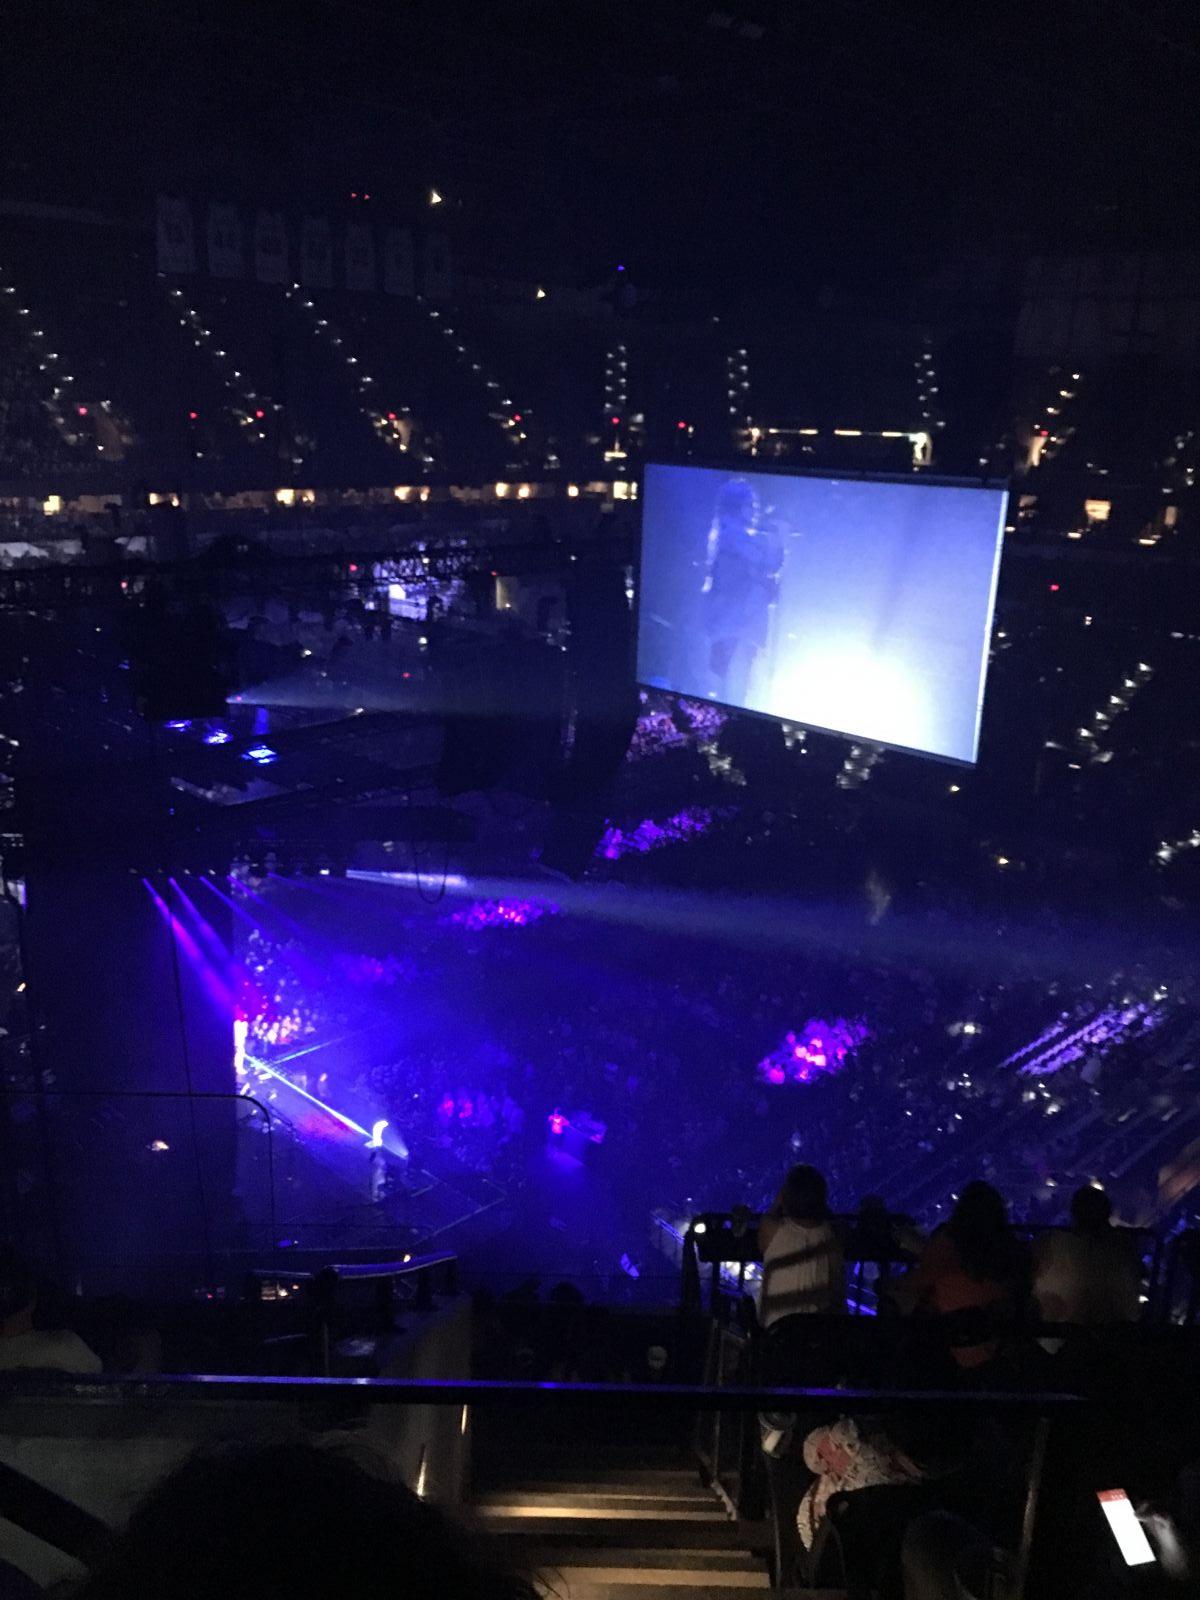 section 211, row 9 seat view  for concert - at&t center